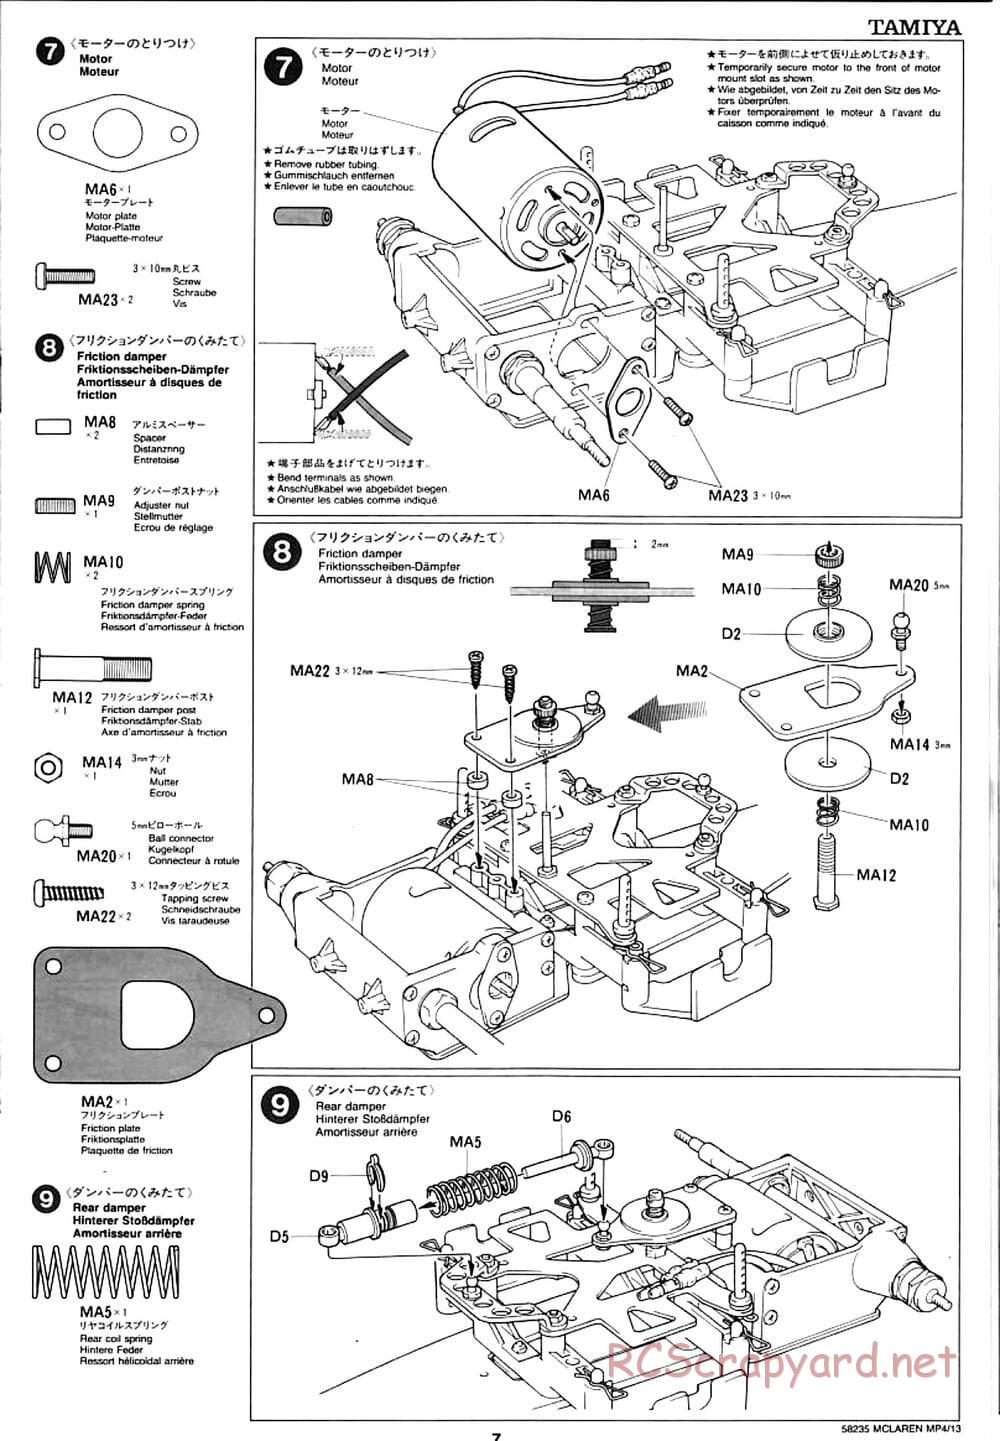 Tamiya - McLaren Mercedes MP4/13 - F103RS Chassis - Manual - Page 7